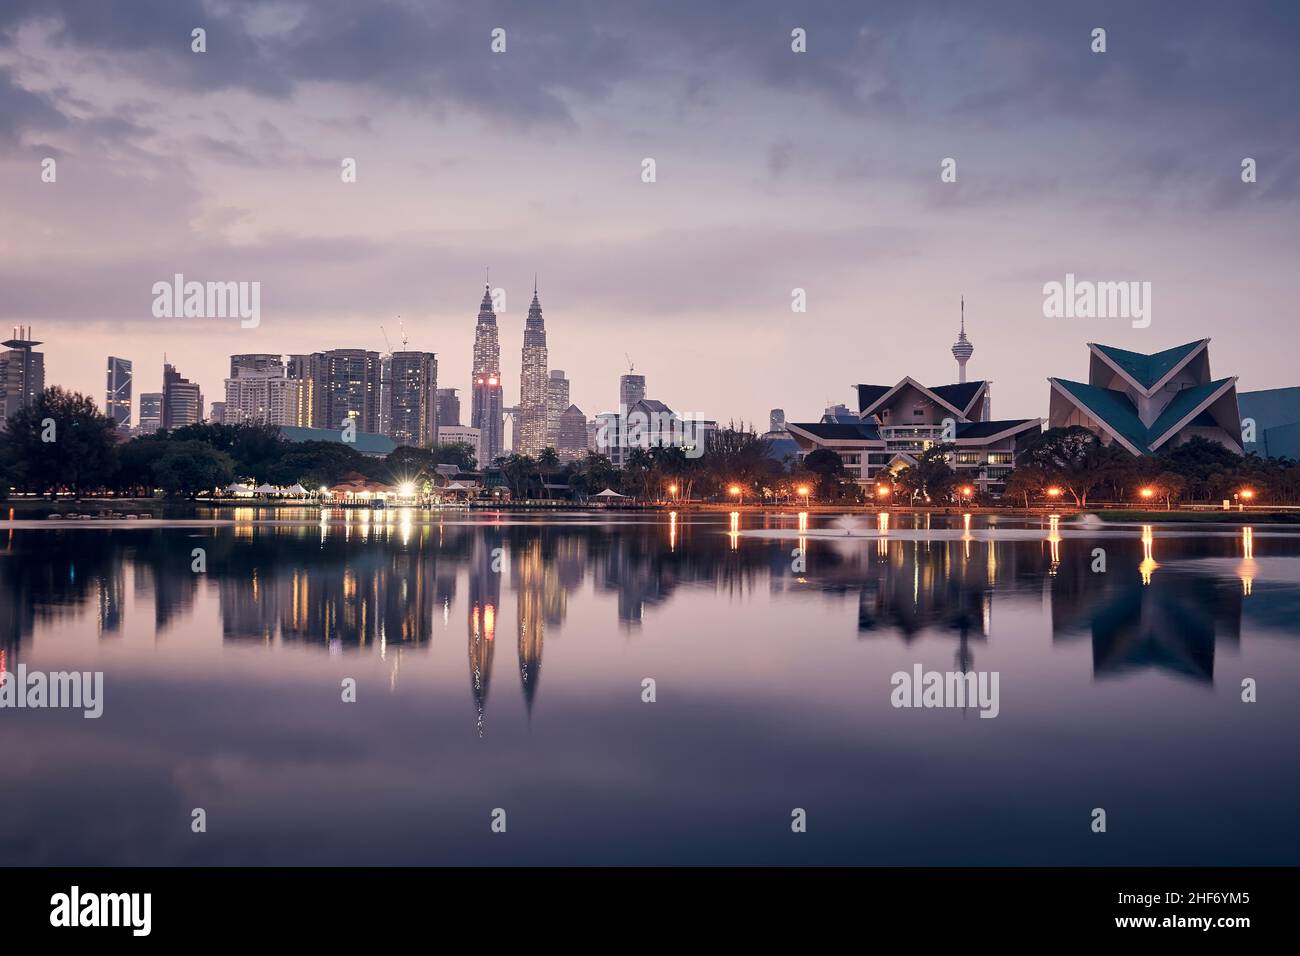 Urban skyline of Kuala Lumpur at dawn. Reflection of skyscrapers in the water surface. Stock Photo